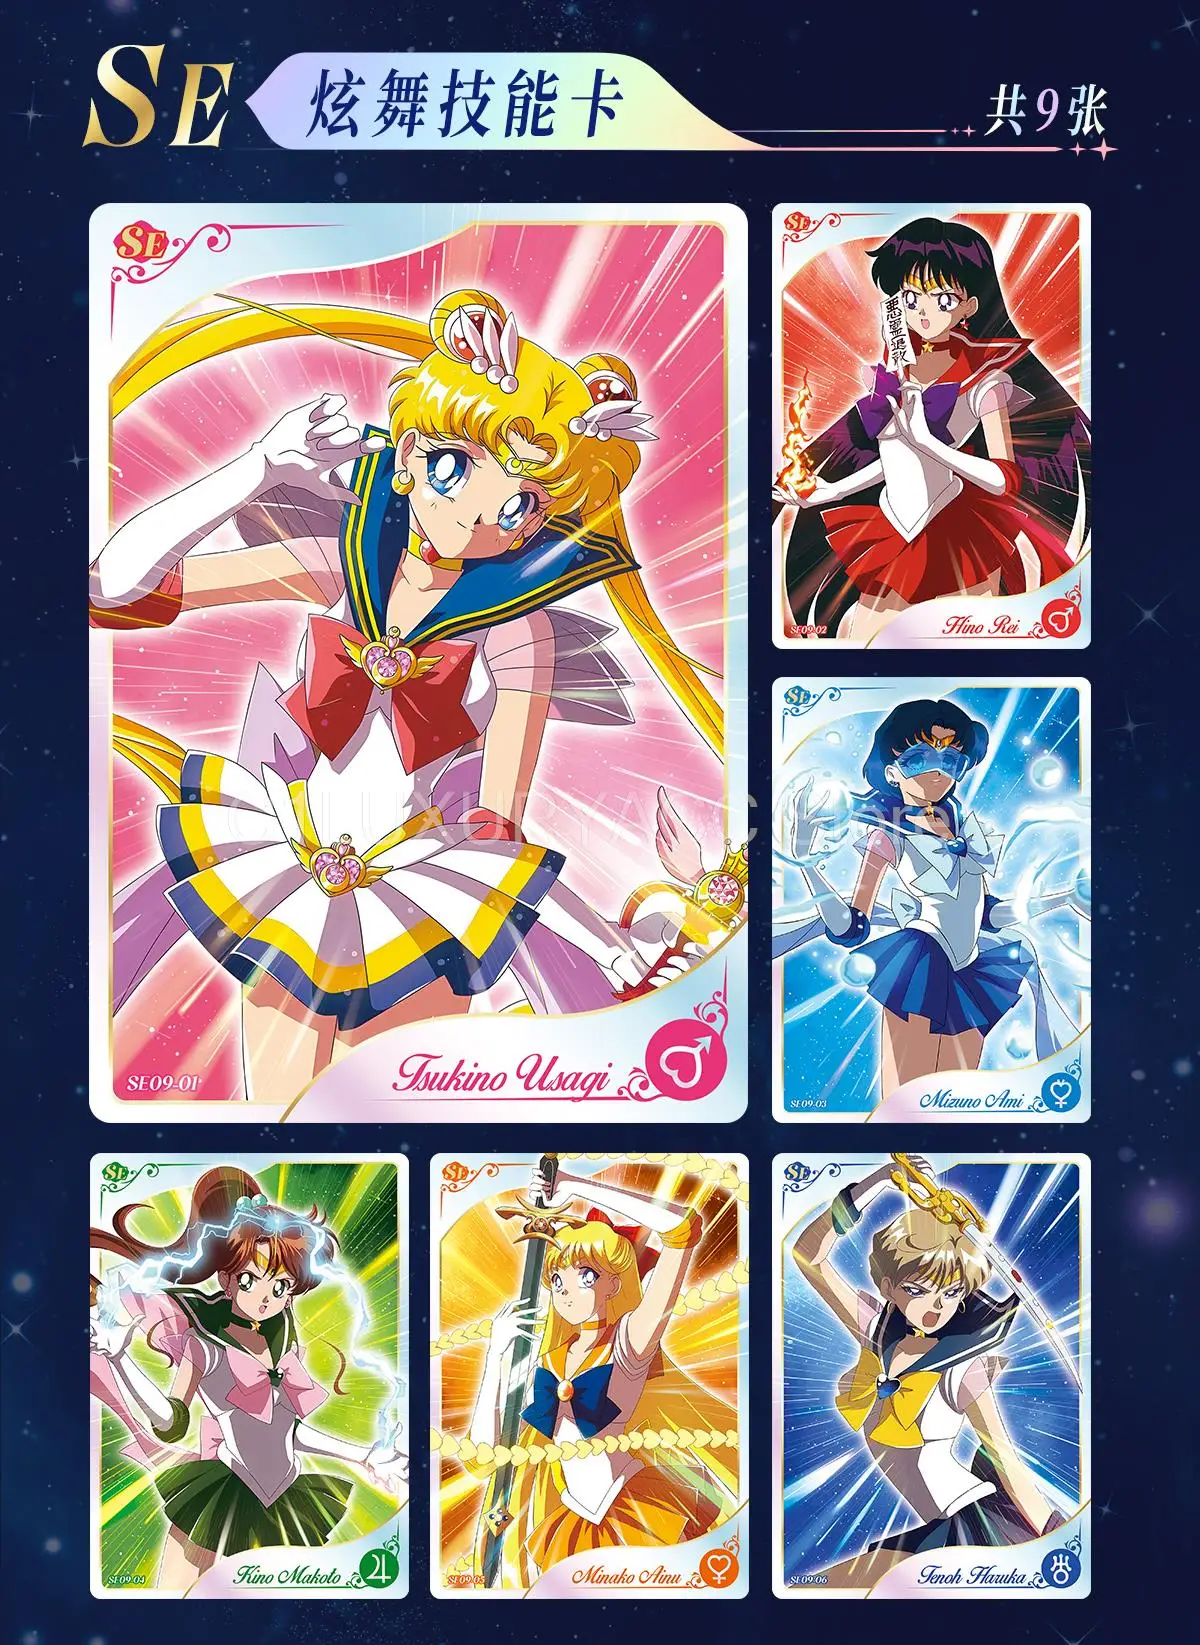 New Genuine Sailor Moon Card Anime Beautiful Girl Characters Rare SSP Constellation Series Collection Cards Children Xmas Gifts